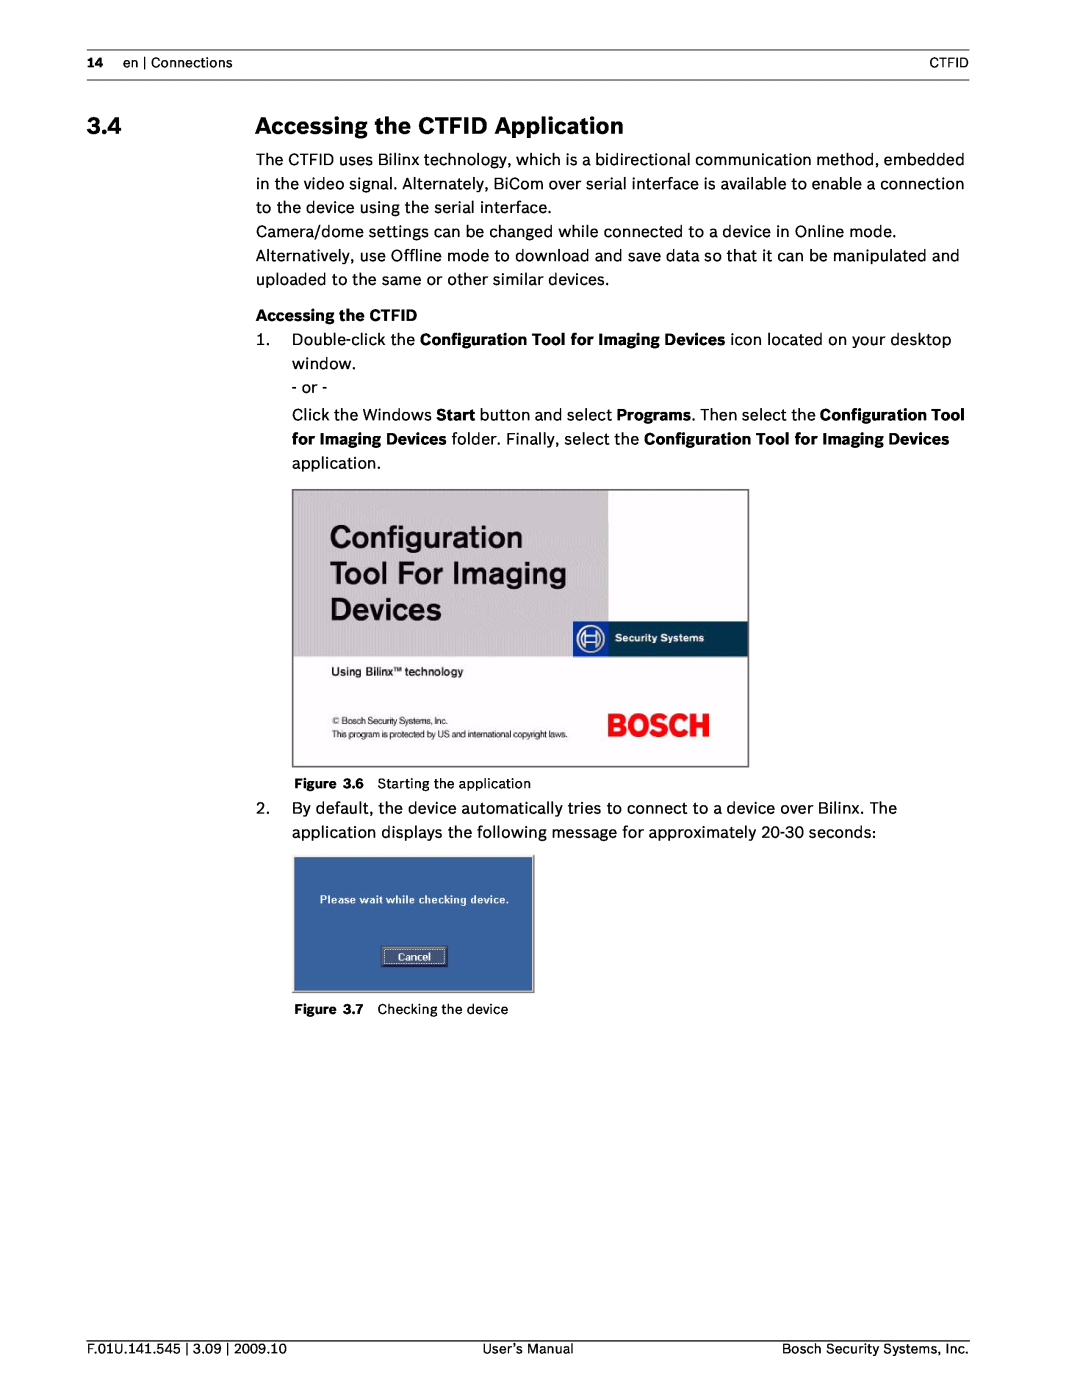 Bosch Appliances VP-CFGSFT user manual 3.4Accessing the CTFID Application 